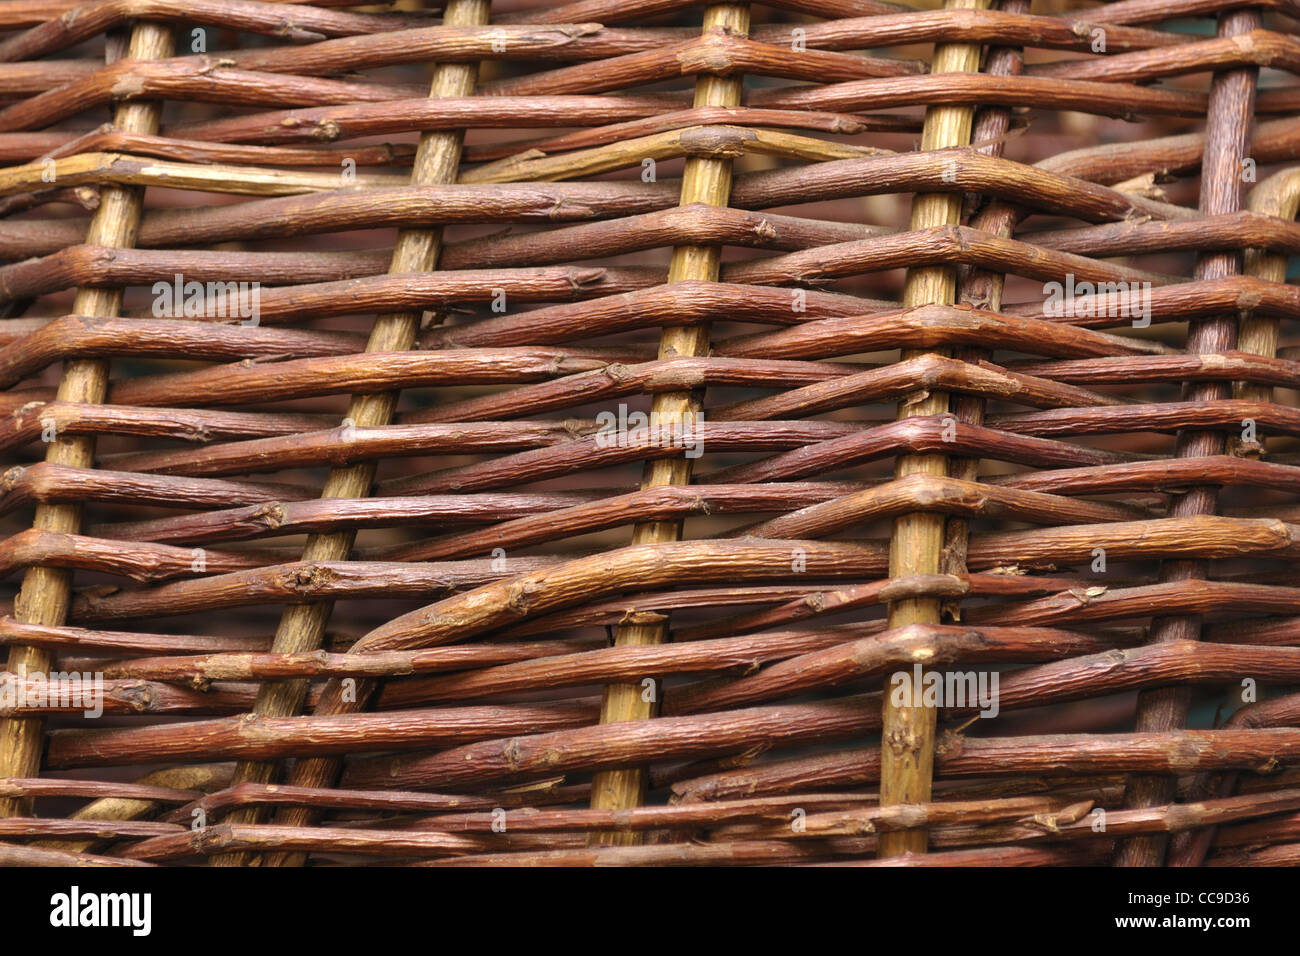 detailed close-up of vintage wooden weaving pattern made from willow shoots Stock Photo